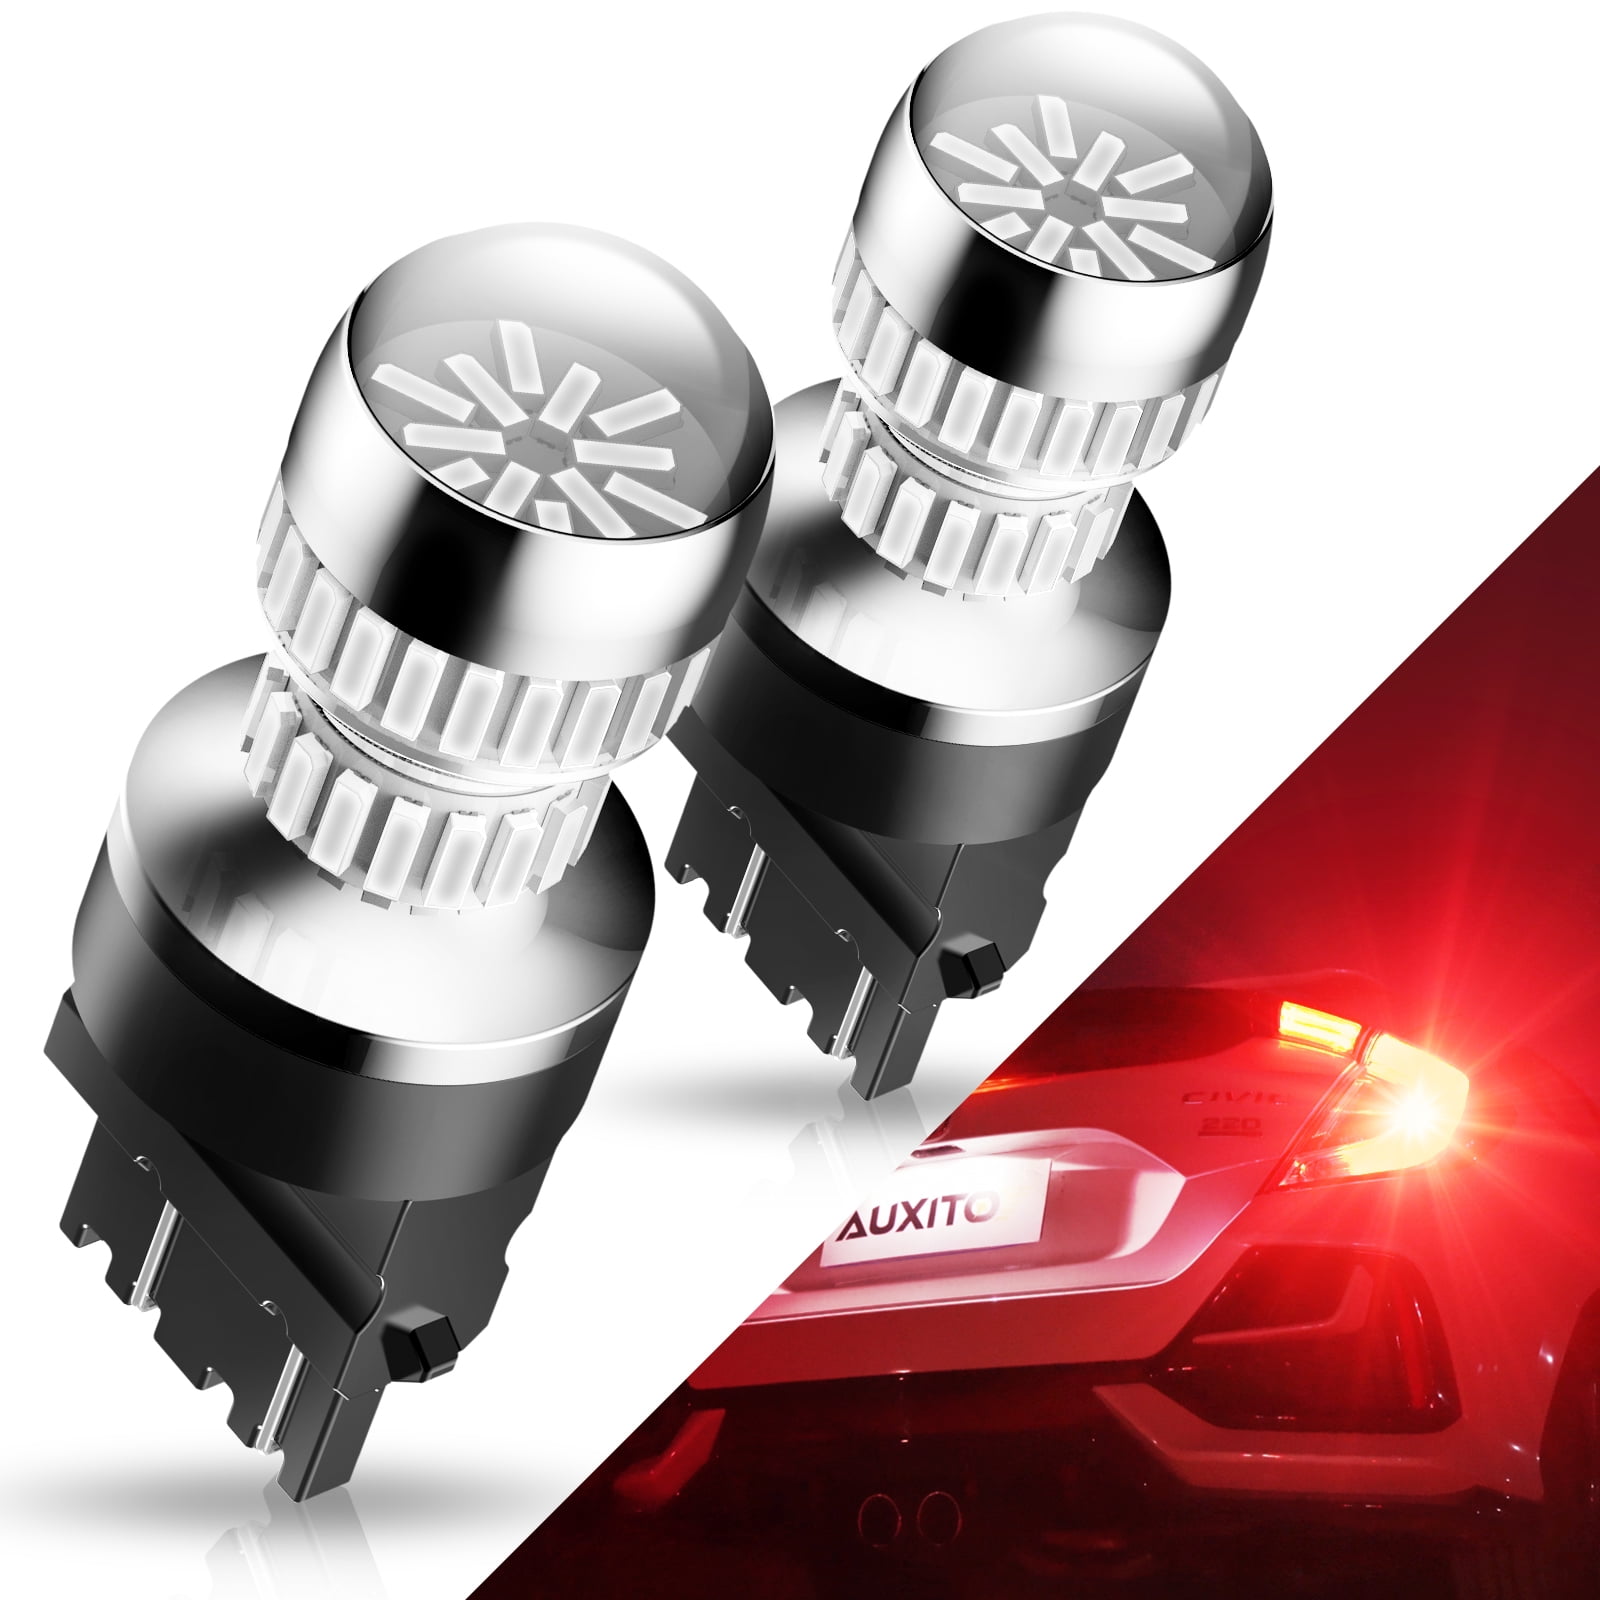 2 x AUXITO 3157 Dual Color Switchback Amber/White LED Turn Signal Lights Bulb AF 